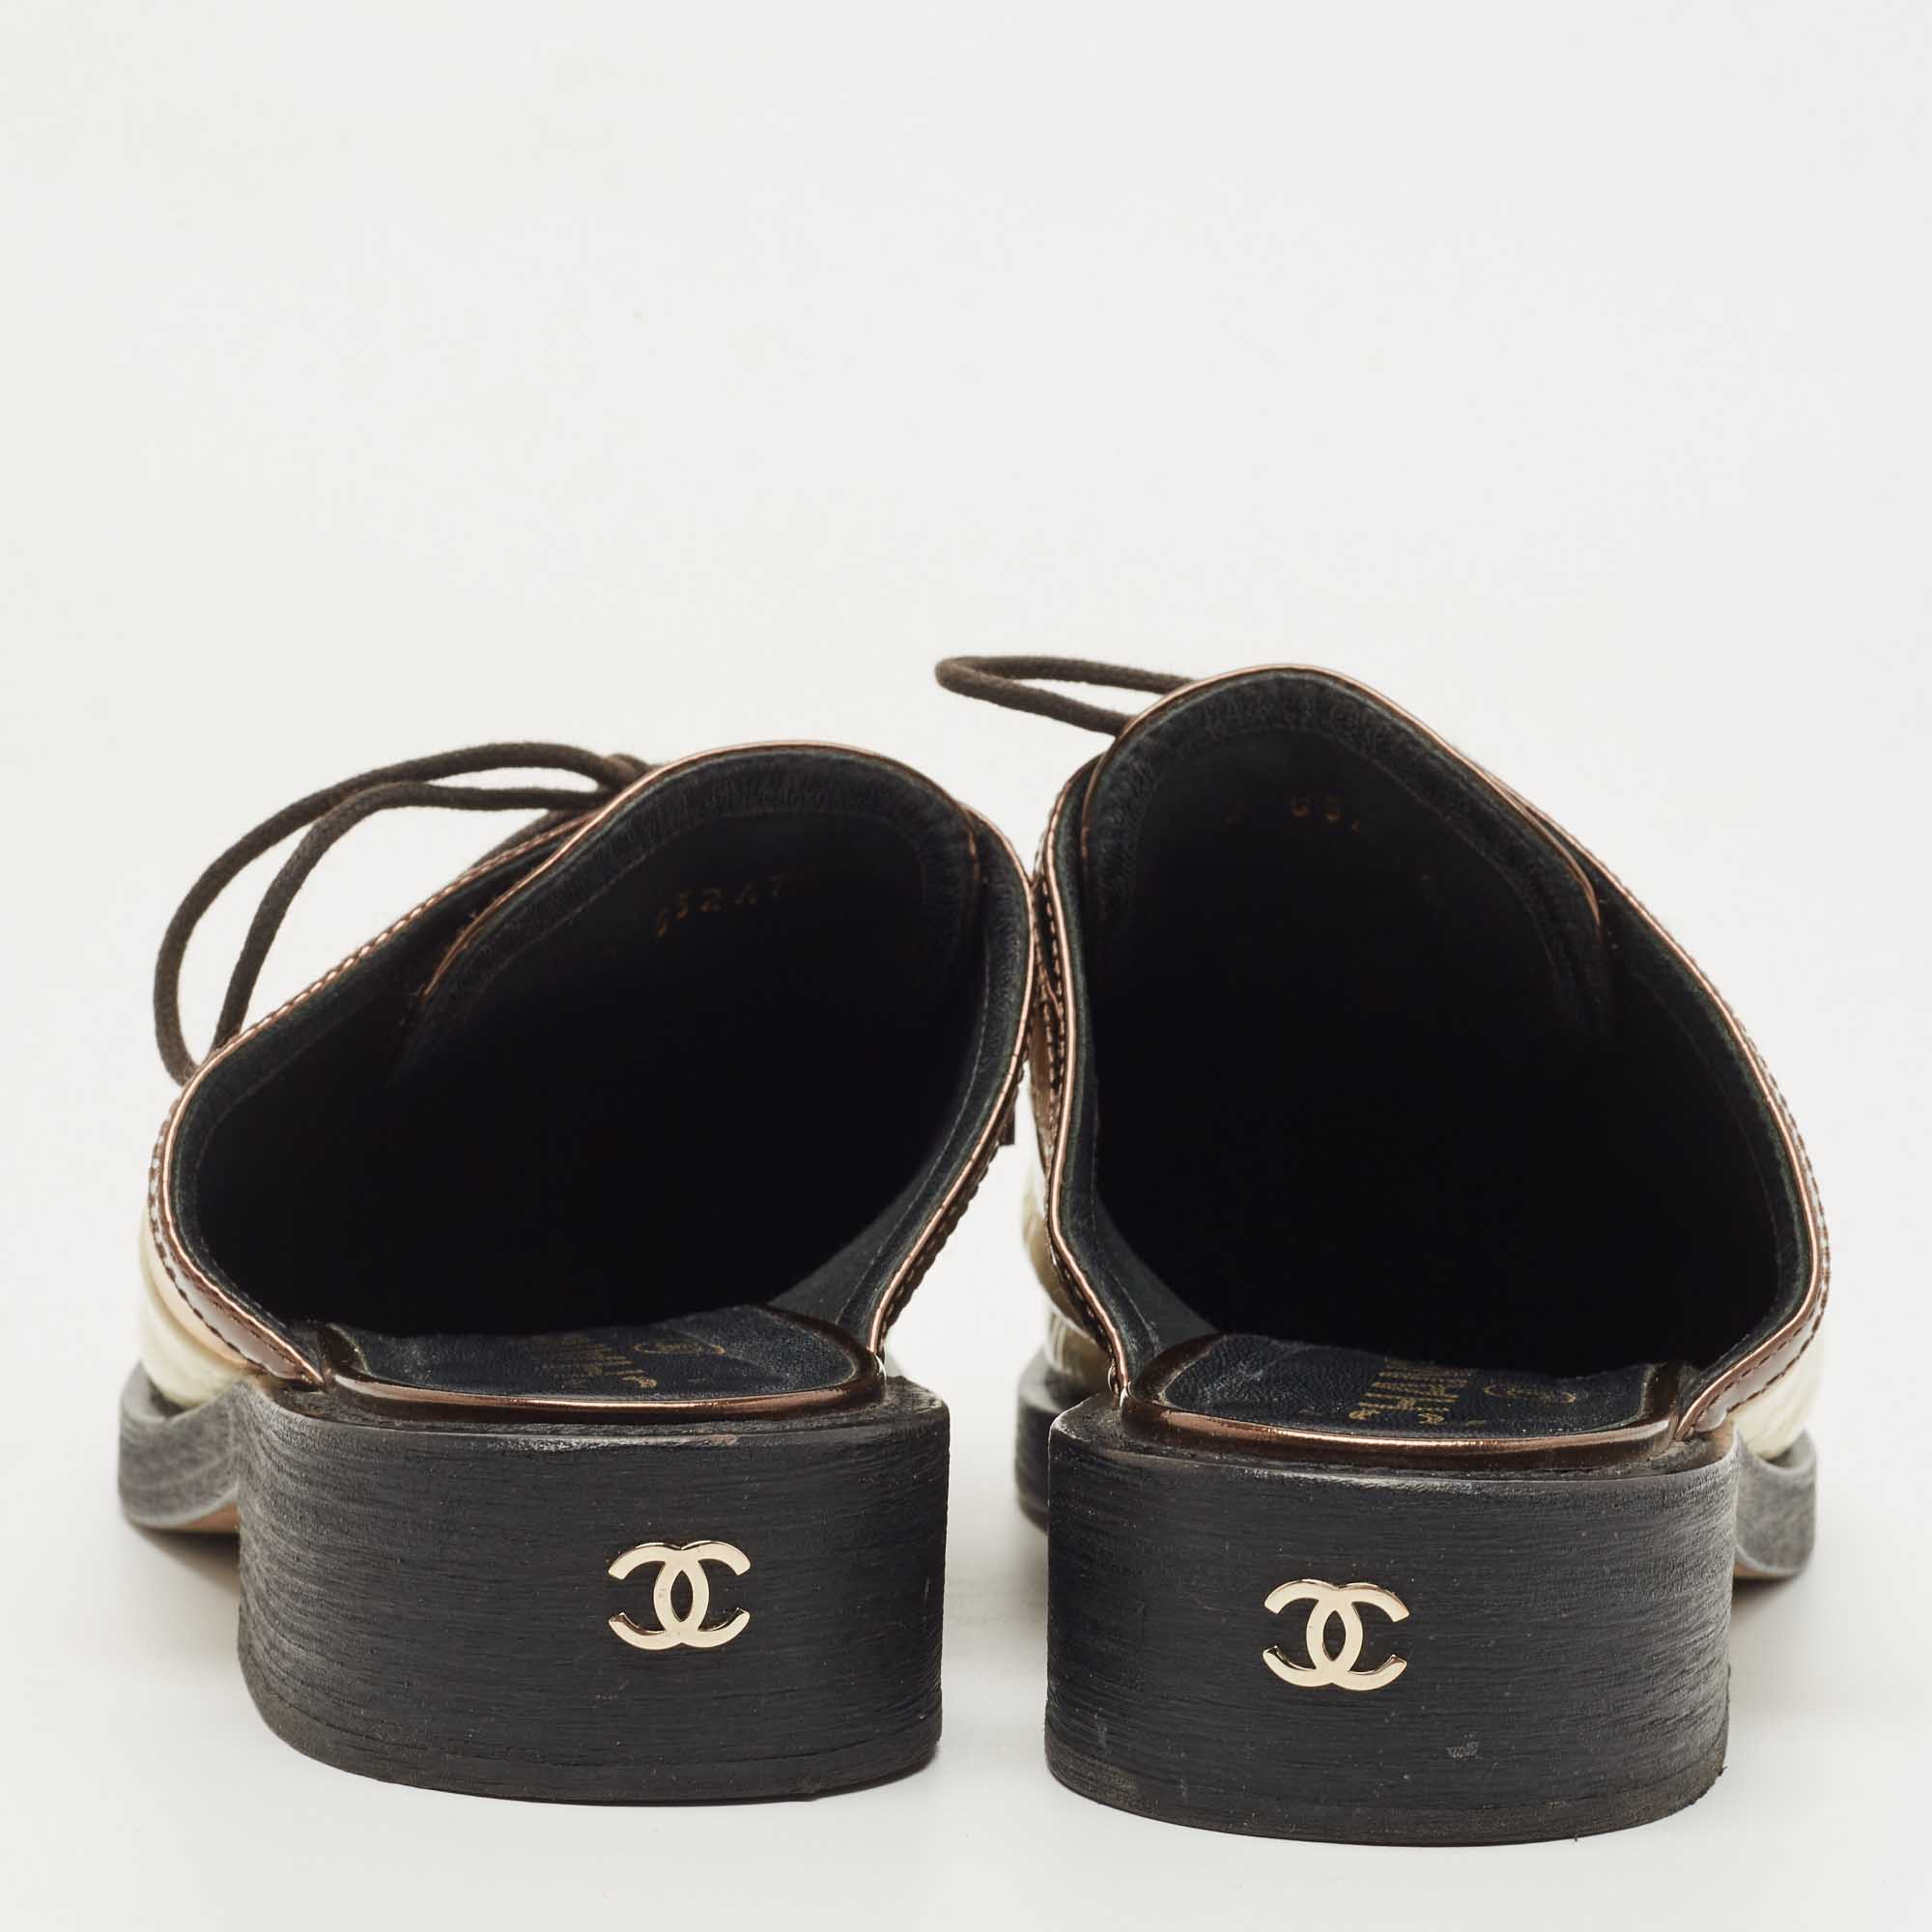 Chanel Metallic Leather And Patent CC Lace Up Mules Size 39